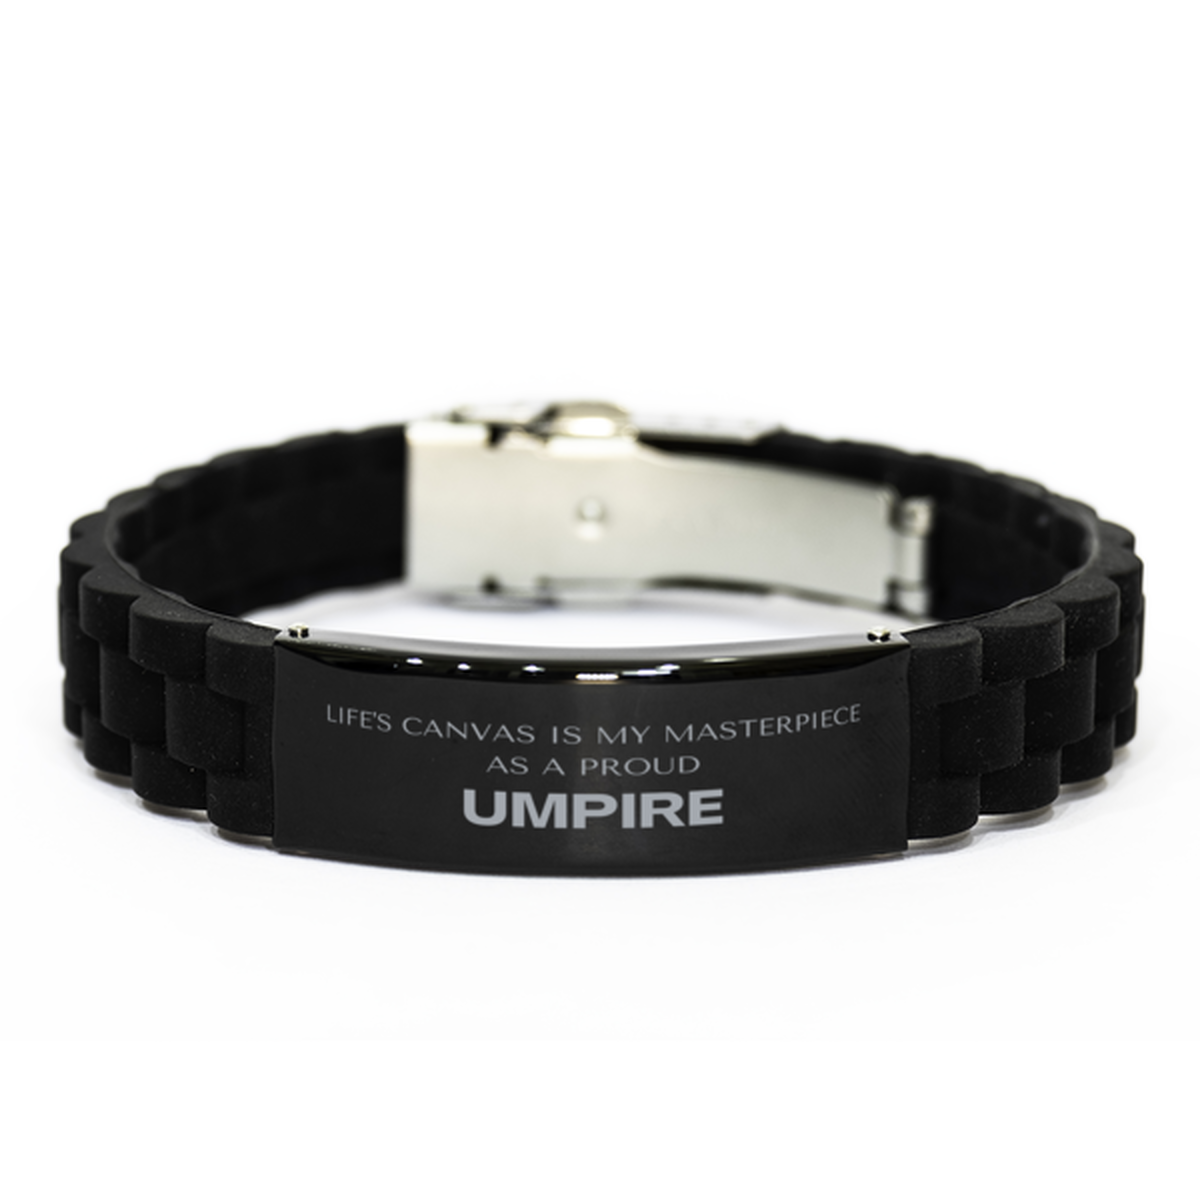 Proud Umpire Gifts, Life's canvas is my masterpiece, Epic Birthday Christmas Unique Black Glidelock Clasp Bracelet For Umpire, Coworkers, Men, Women, Friends